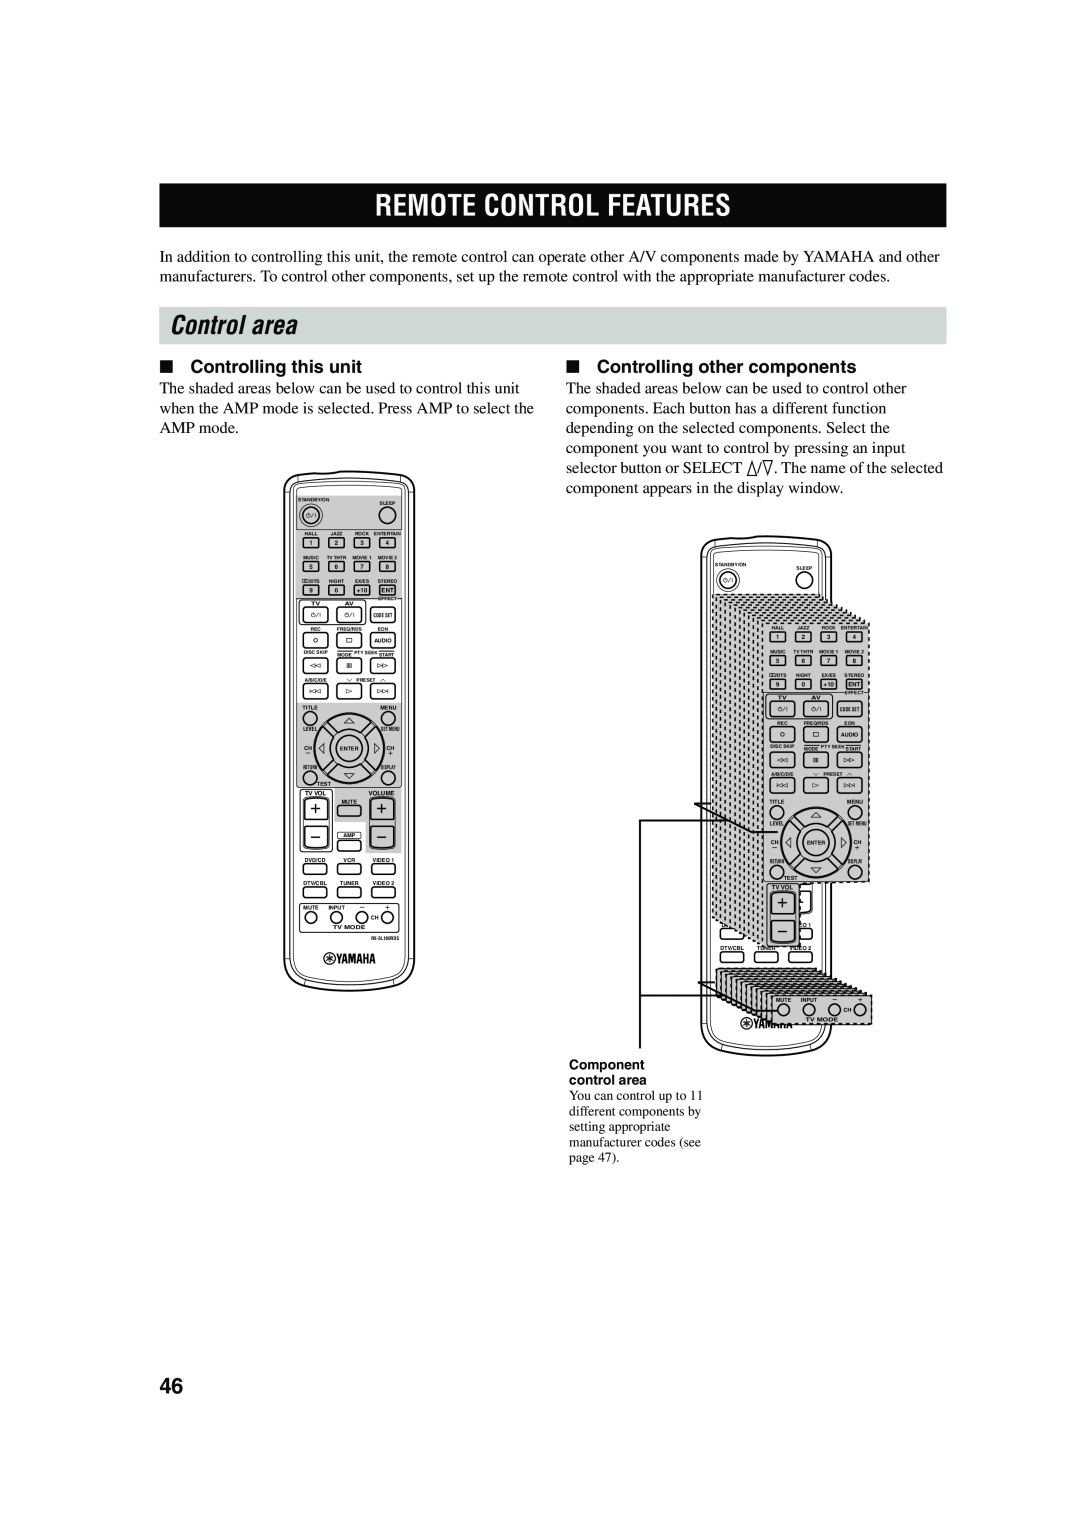 Yamaha RX-SL100RDS owner manual Remote Control Features, Control area, Controlling this unit, Controlling other components 